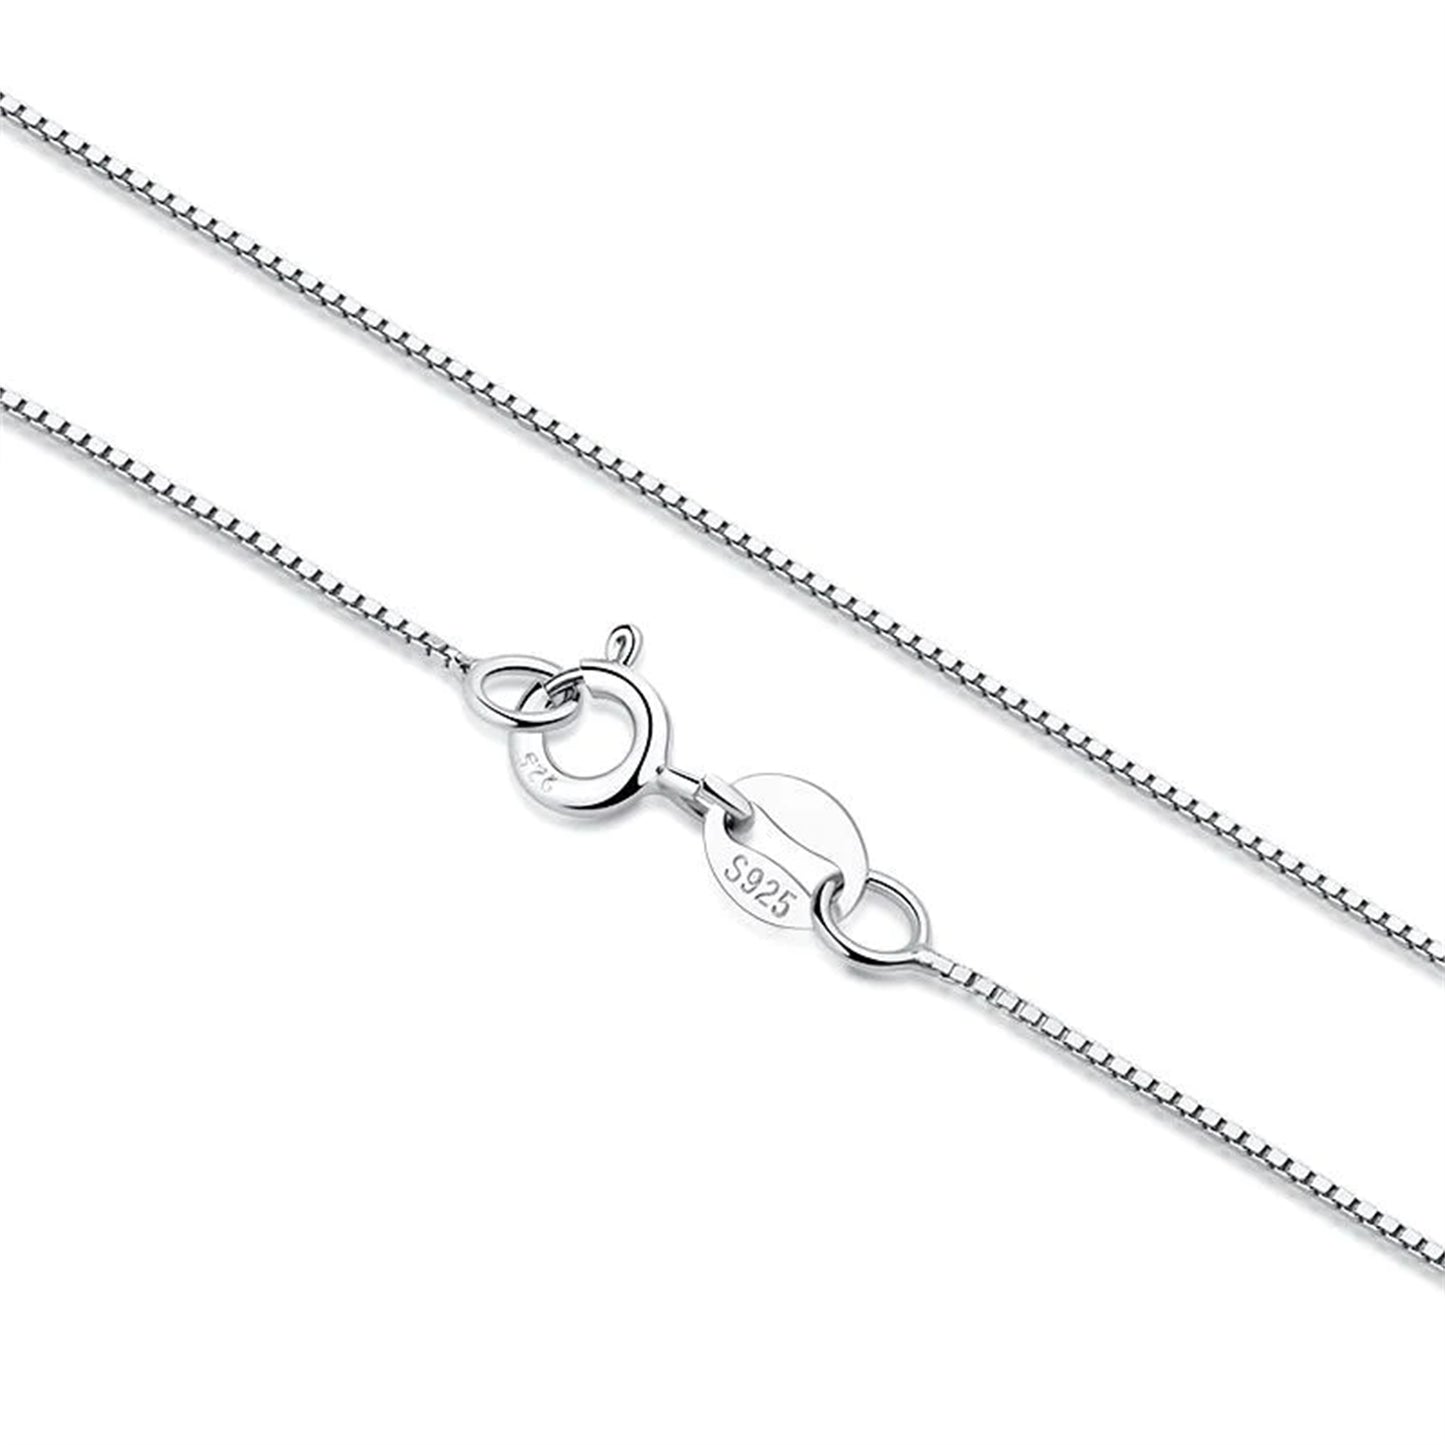 Sterling Silver Solid Polished Shiny Crescent Moon Charm Pendant Necklace